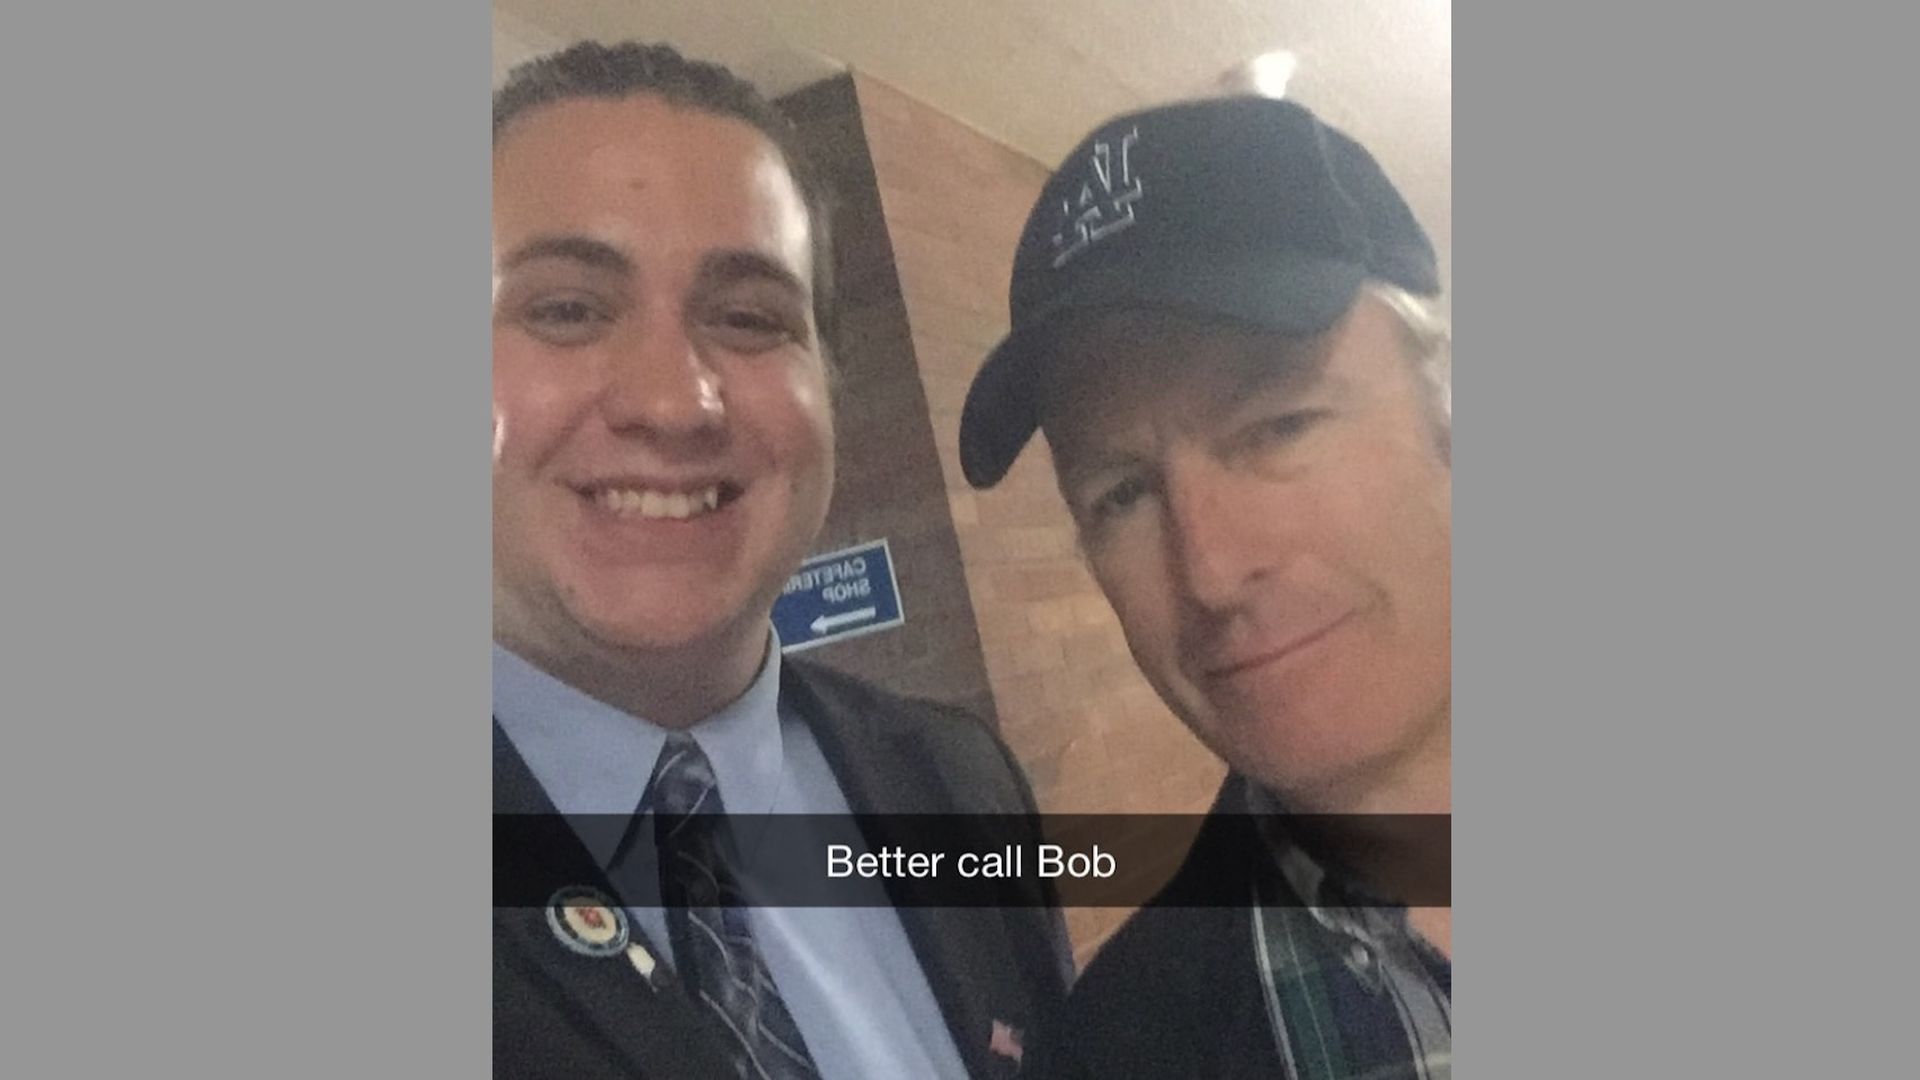 The actor Bob Odenkirk poses for a selfie with a teenage fan in a high school hallway.